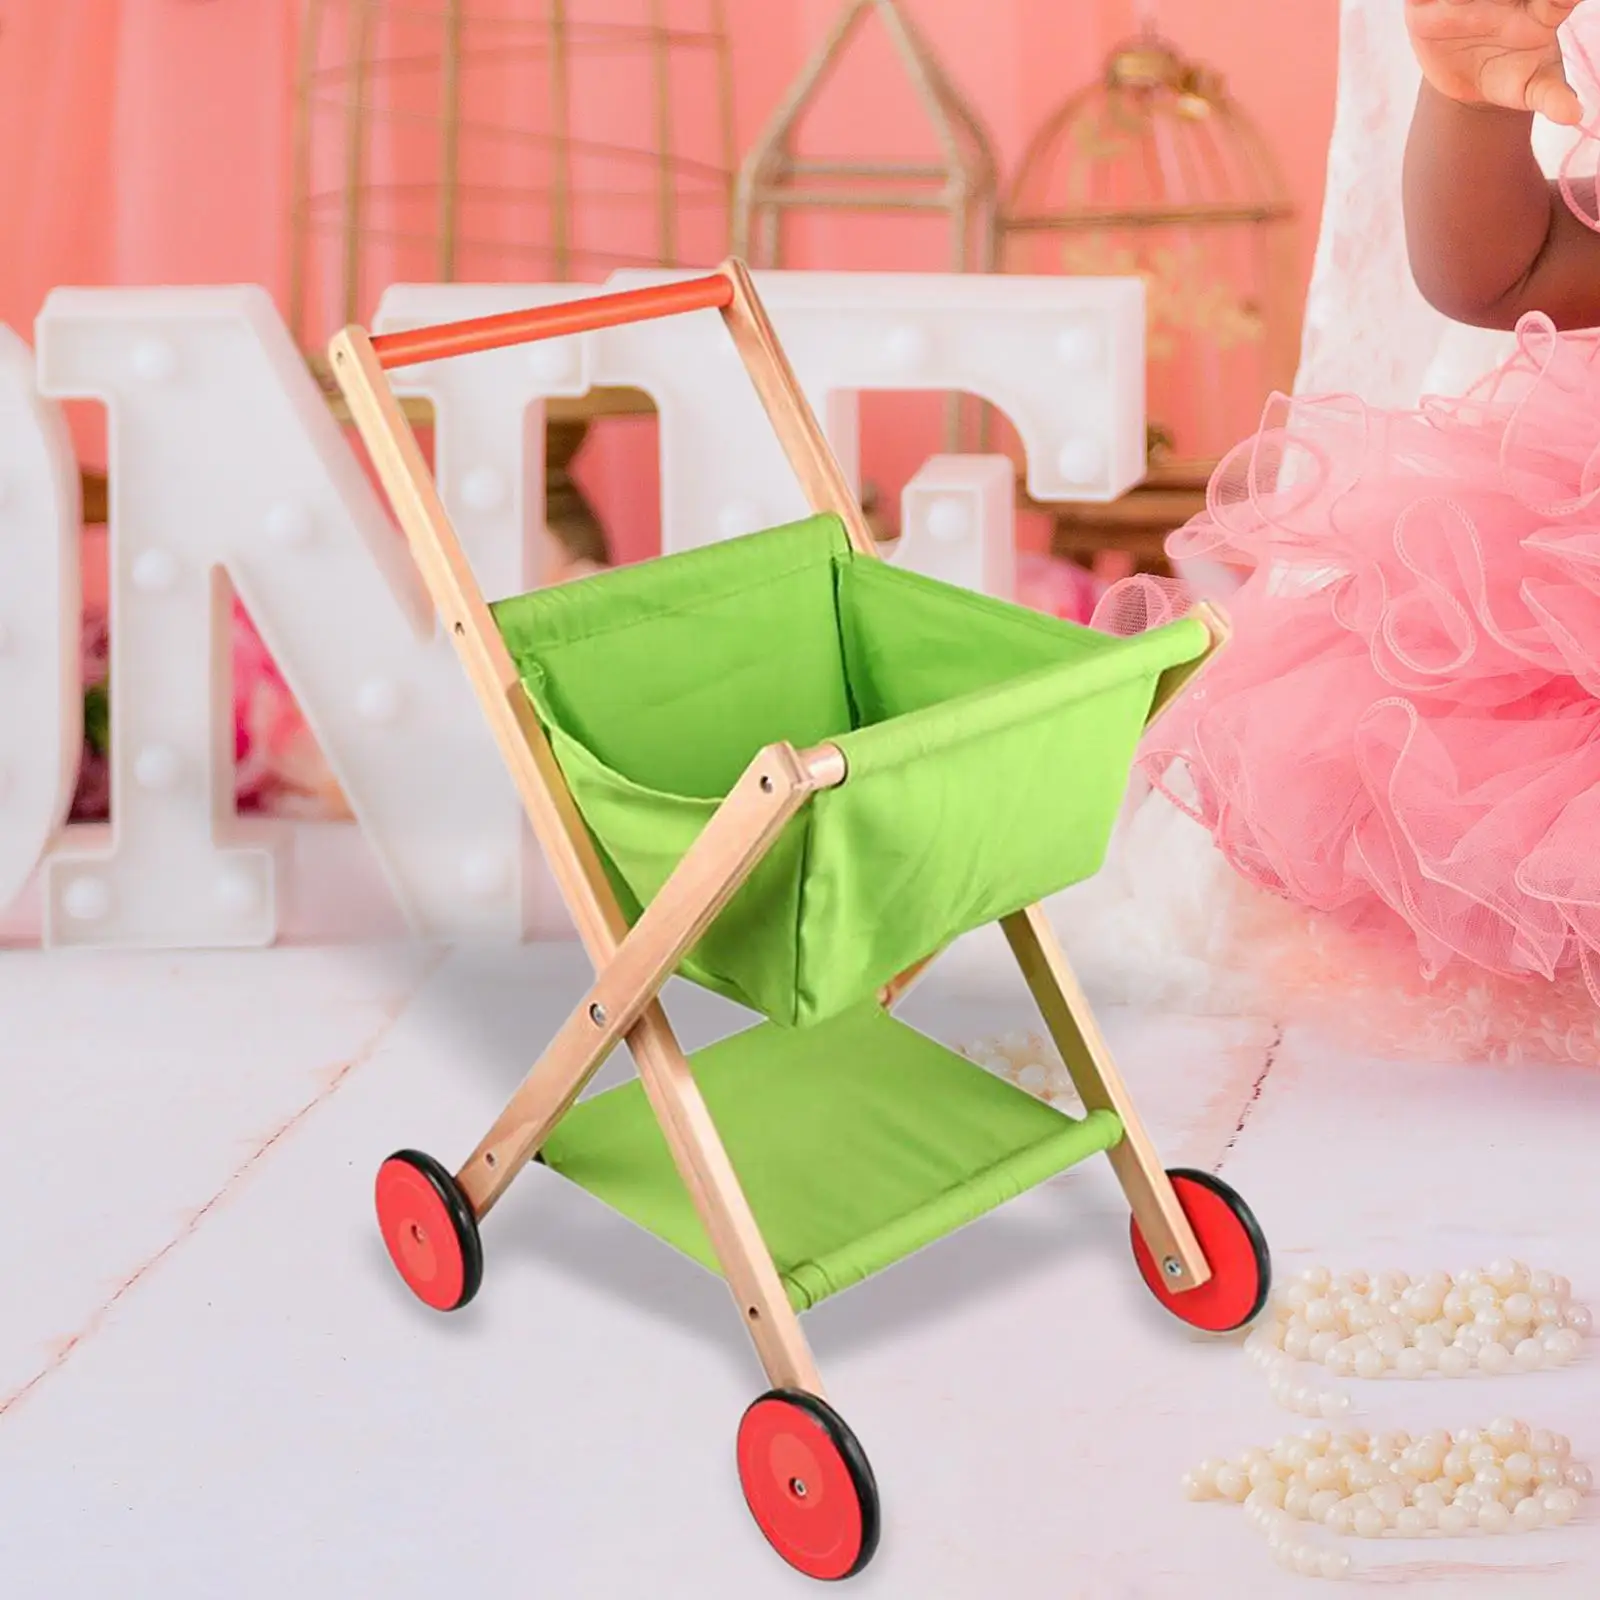 Simulated Grocery Store Shopping Trolley Promotes Creativity and Imagination for Toddler Childern